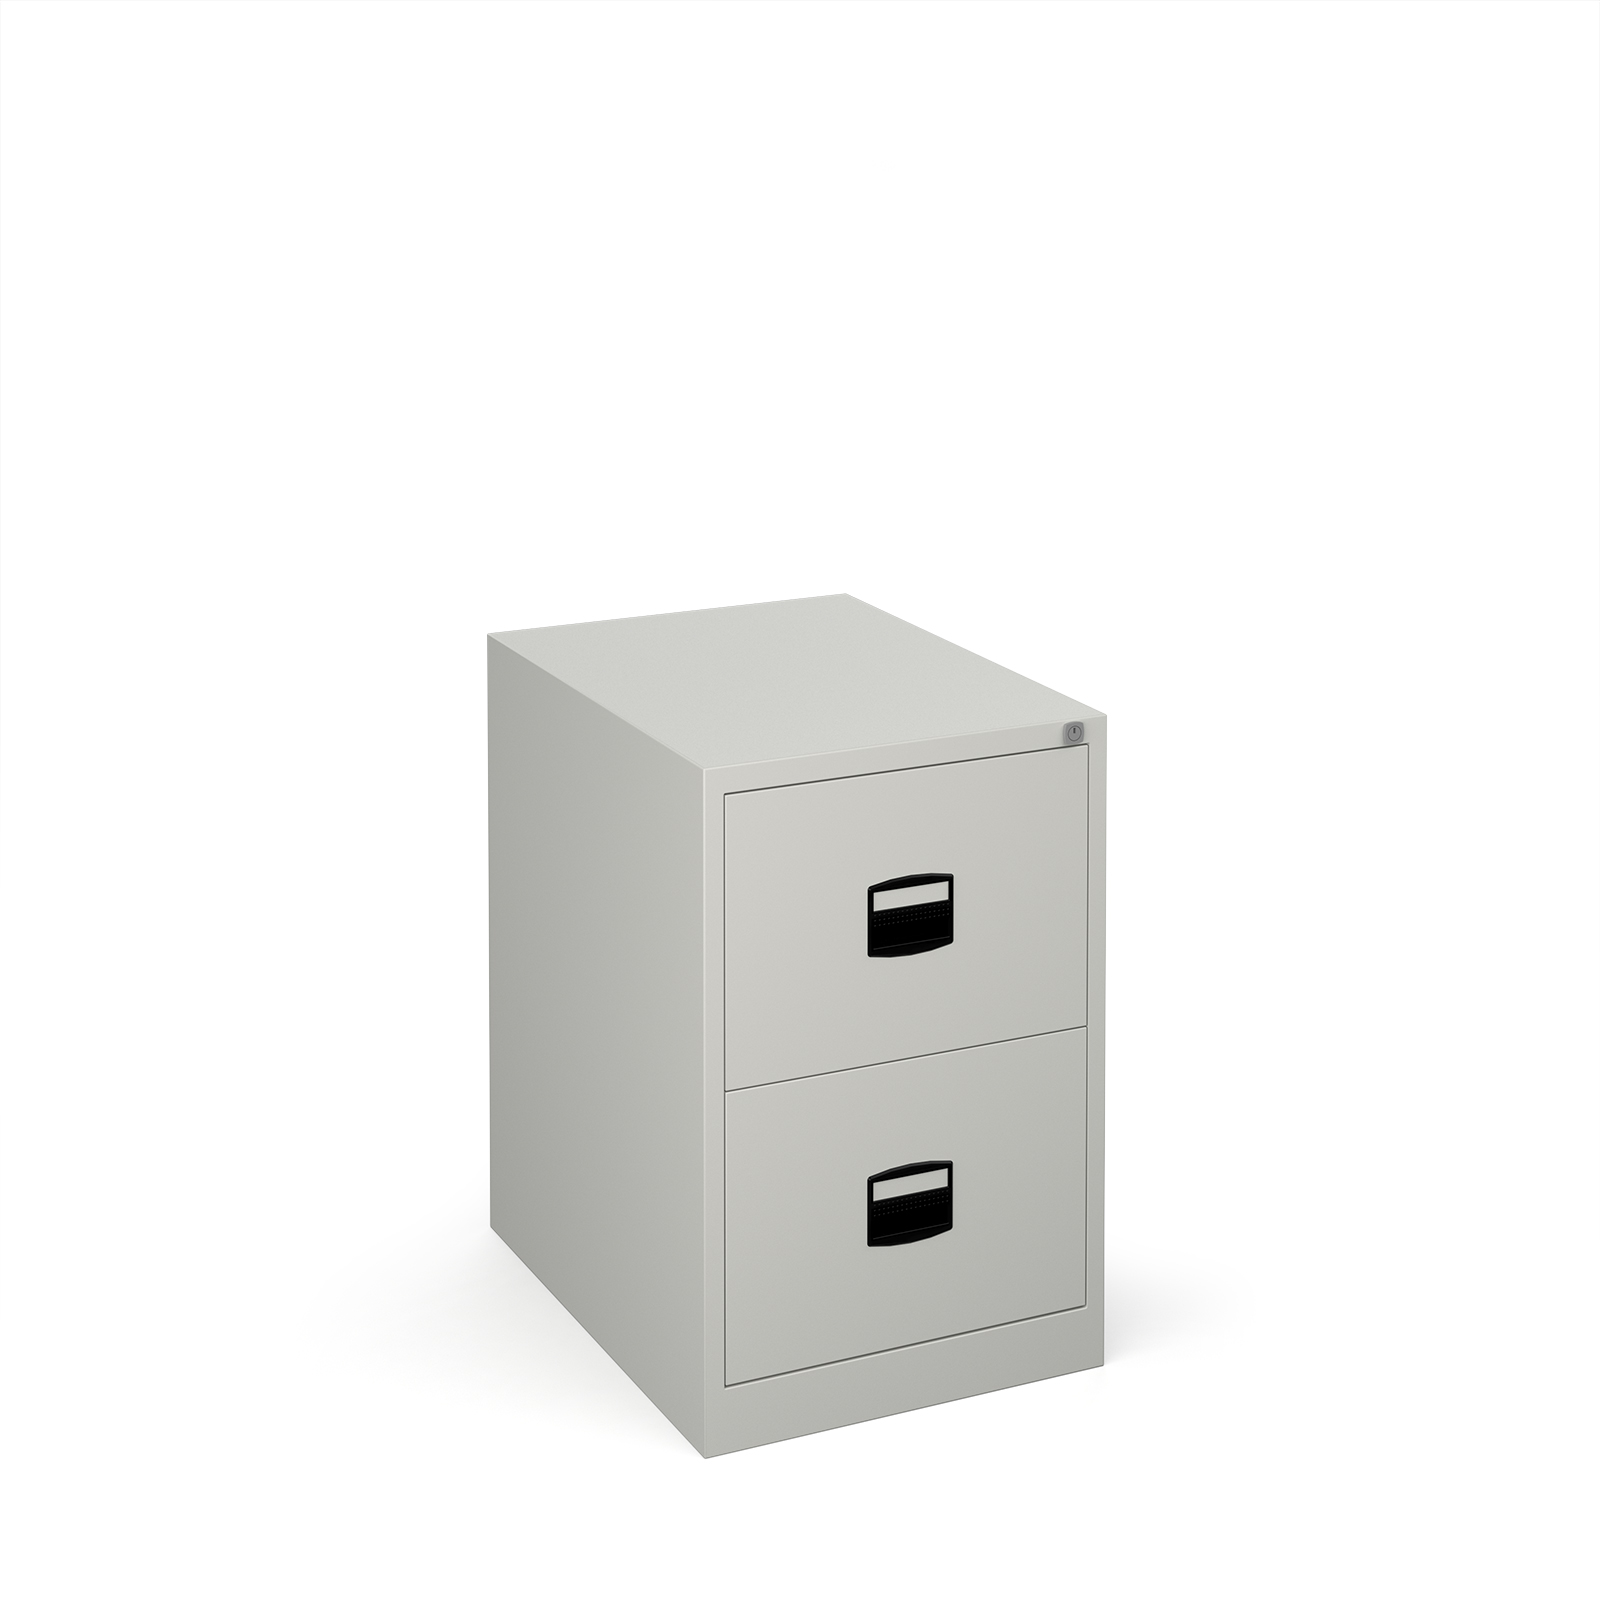 Steel Steel 2 drawer contract filing cabinet 711mm high - goose grey